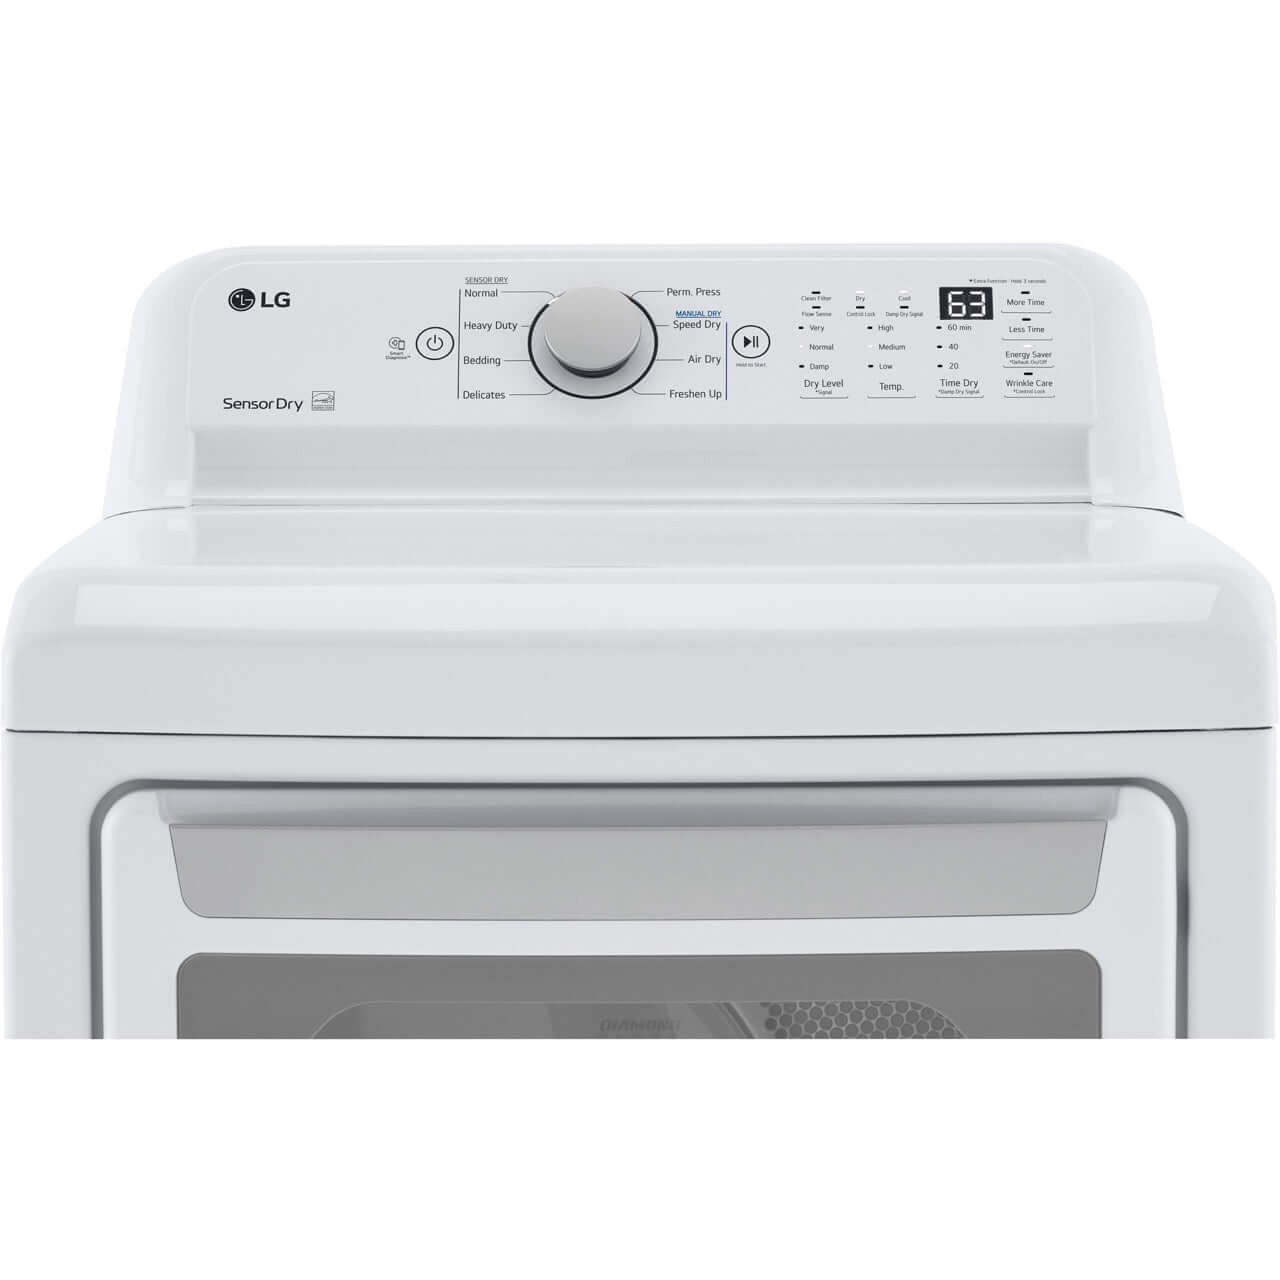 LG Electronics 7.3-Cu. Ft. Ultra Large Capacity Gas Dryer with Sensor Dry Technology (DLG7151W)